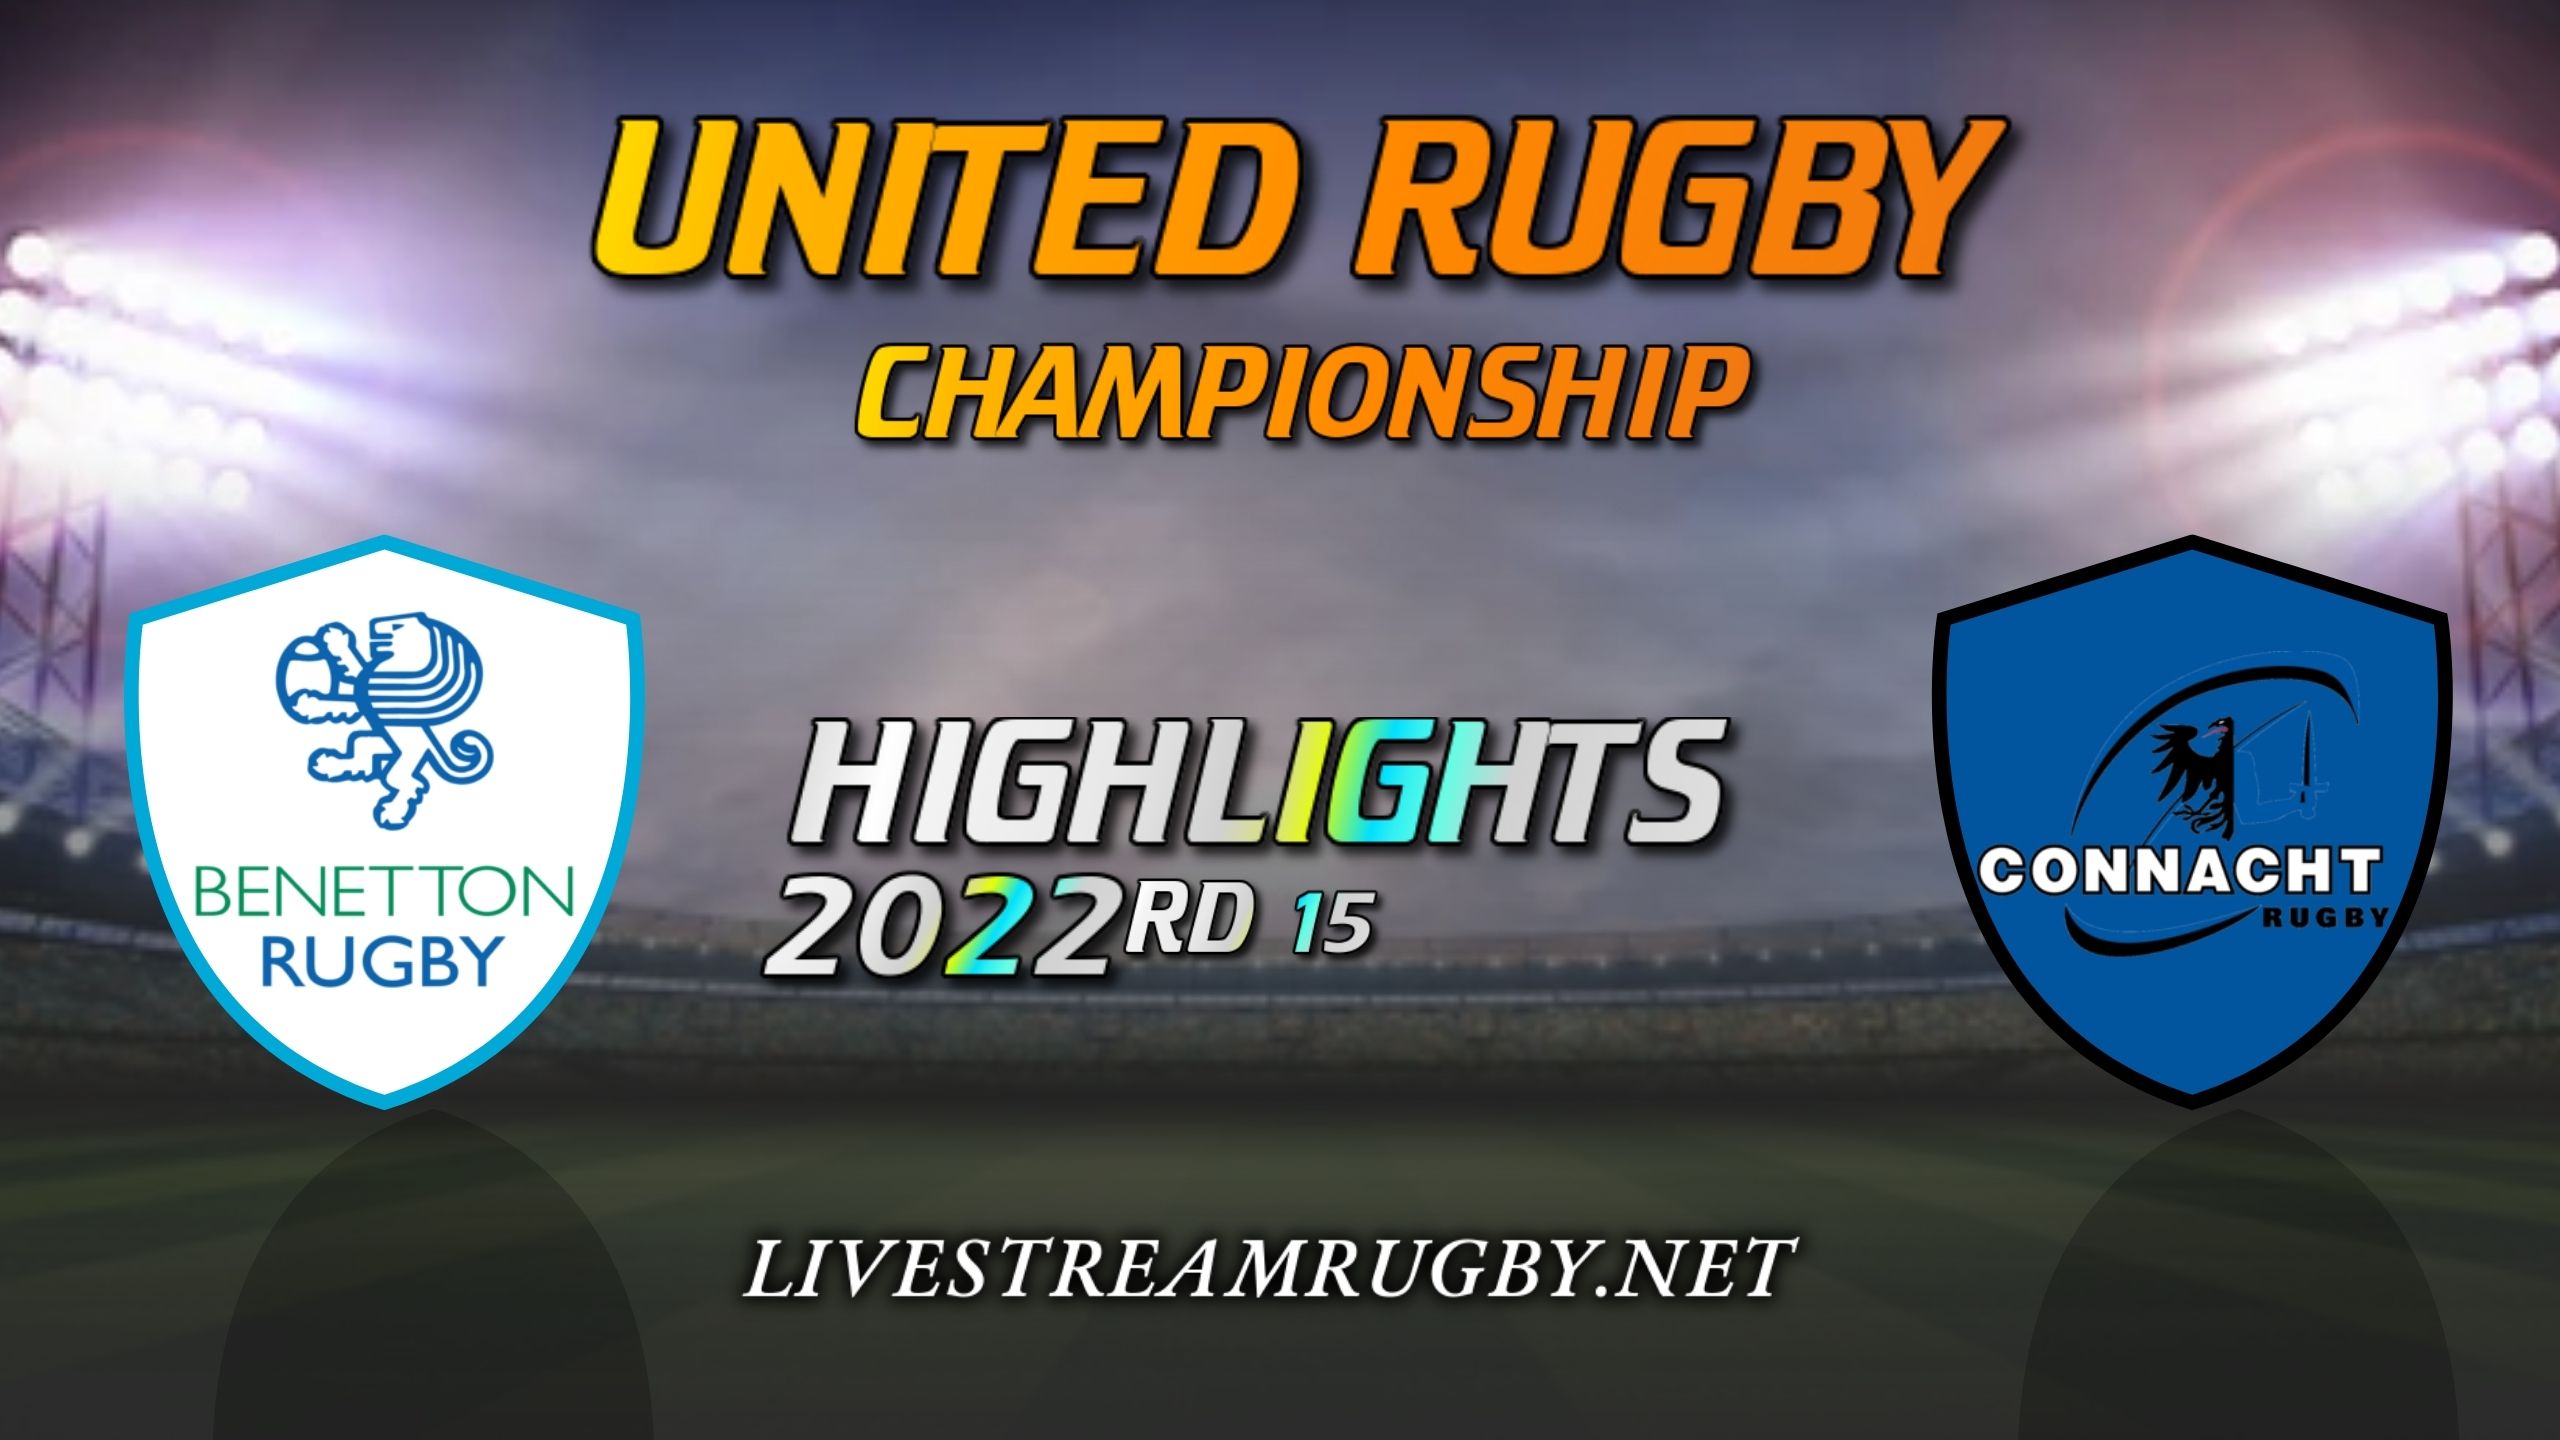 Benetton Vs Connacht Highlights 2022 Rd 15 United Rugby